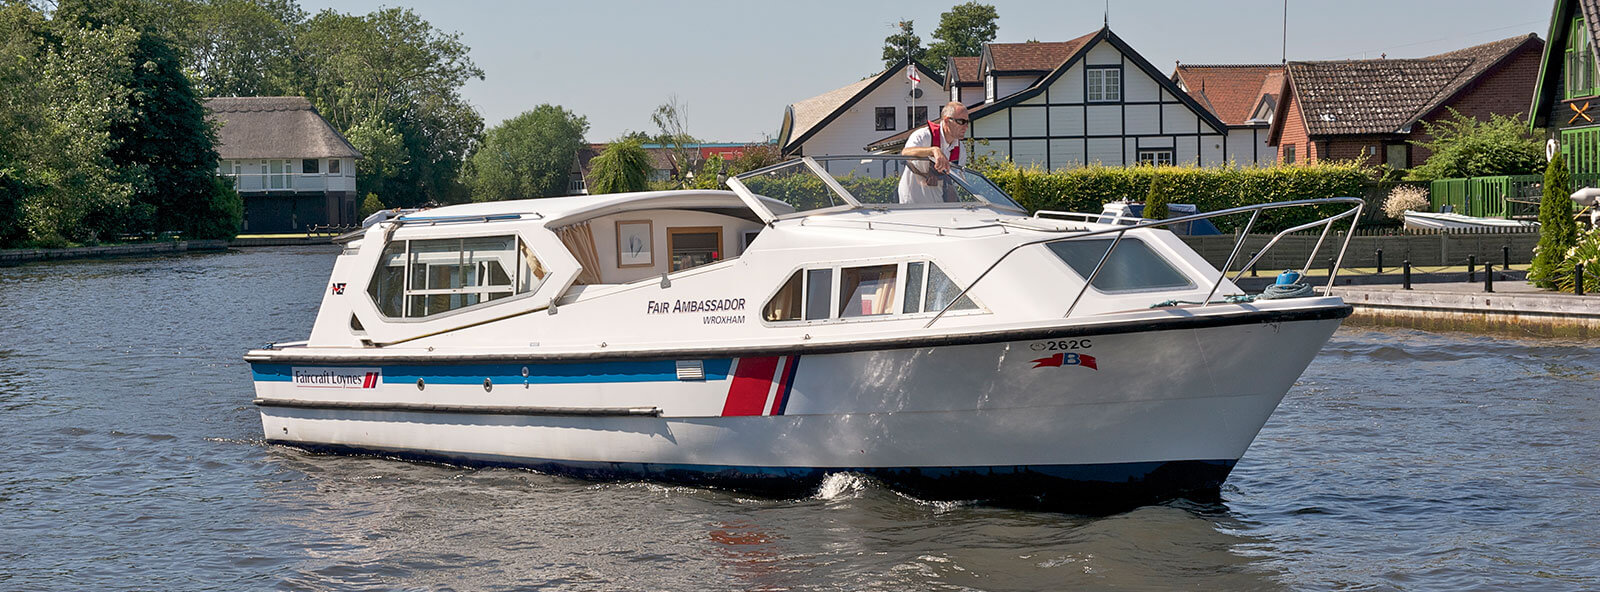 A boat for hire on the Broads